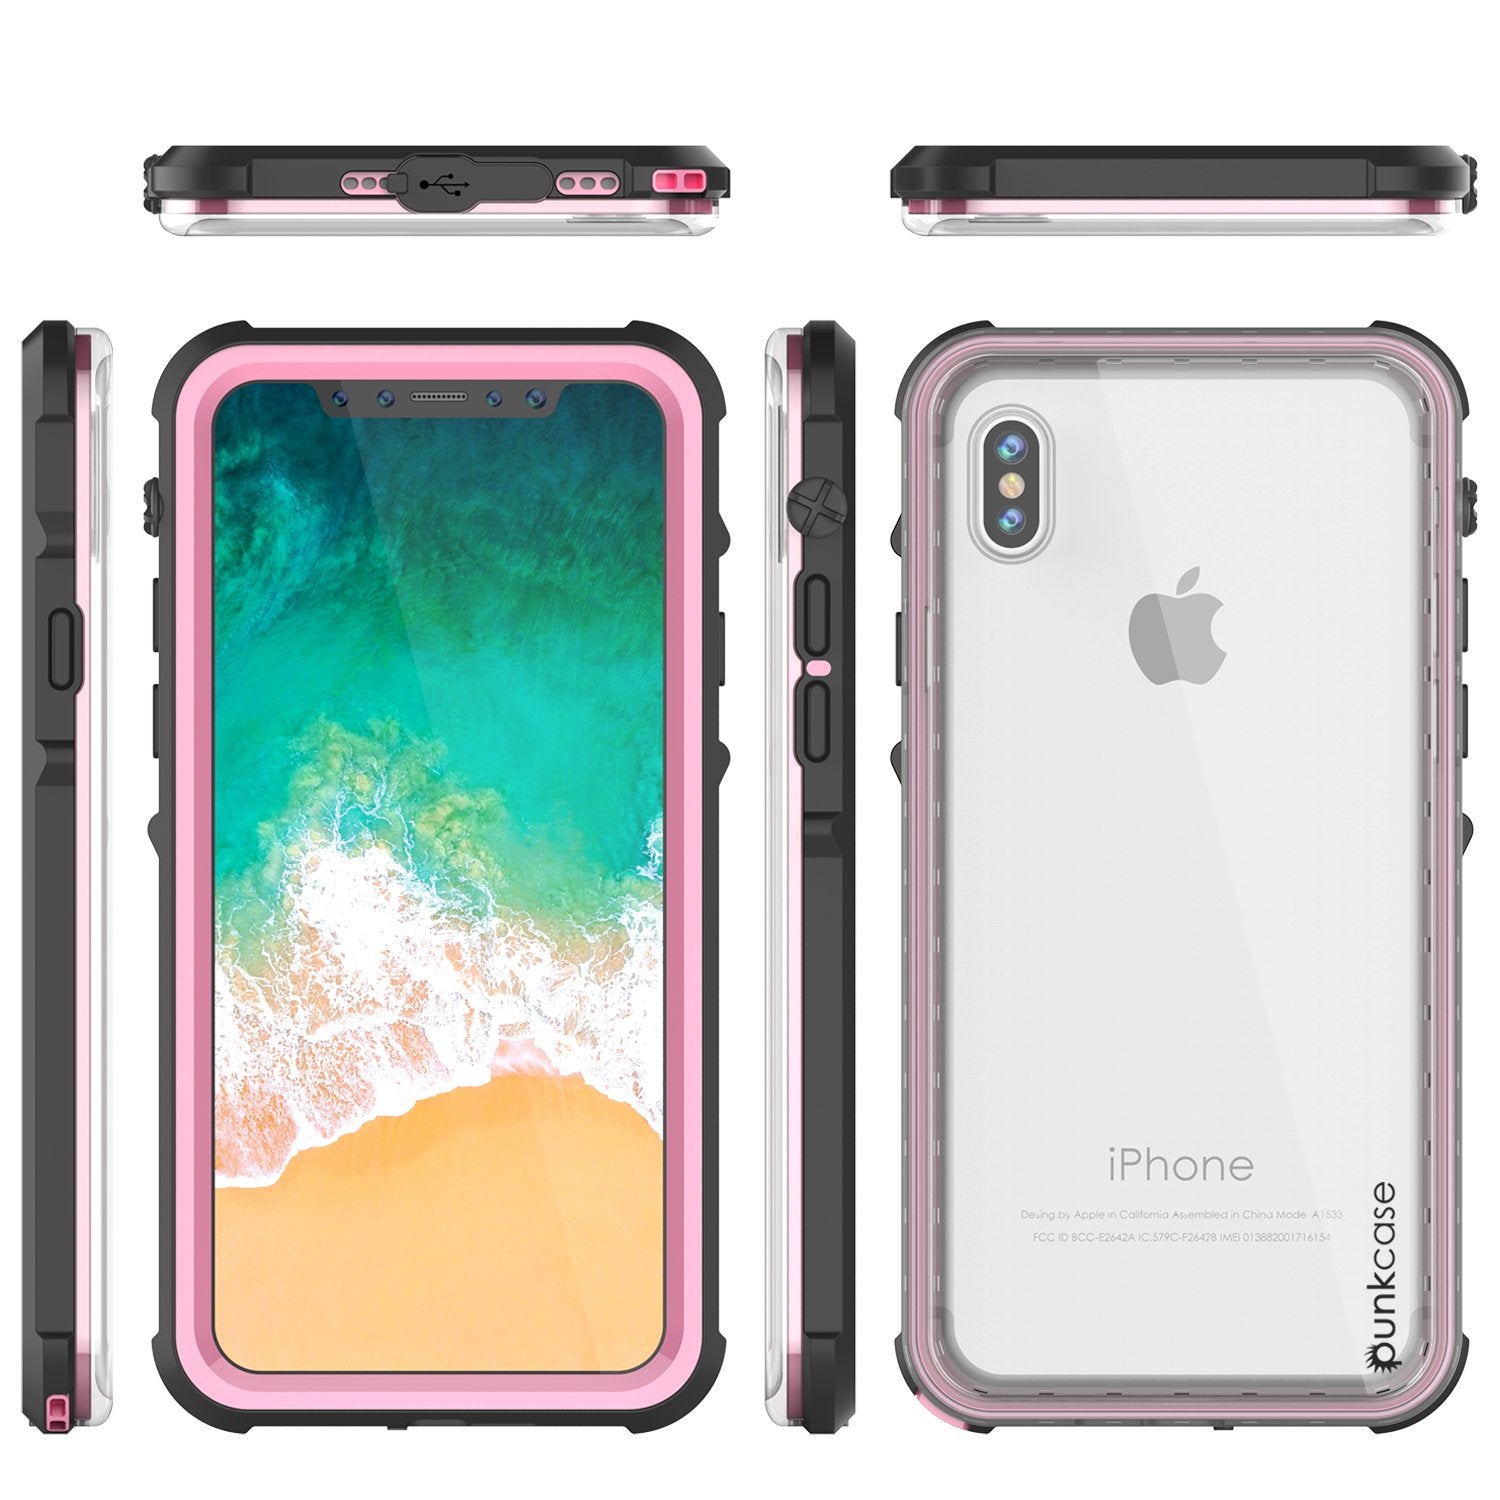 iPhone X Case, PUNKCase [CRYSTAL SERIES] Protective IP68 Certified Cover W/ Attached Screen Protector - DustPROOF, ShockPROOF, SnowPROOF - Ultra Slim Fit for Apple iPhone 10 [PINK]